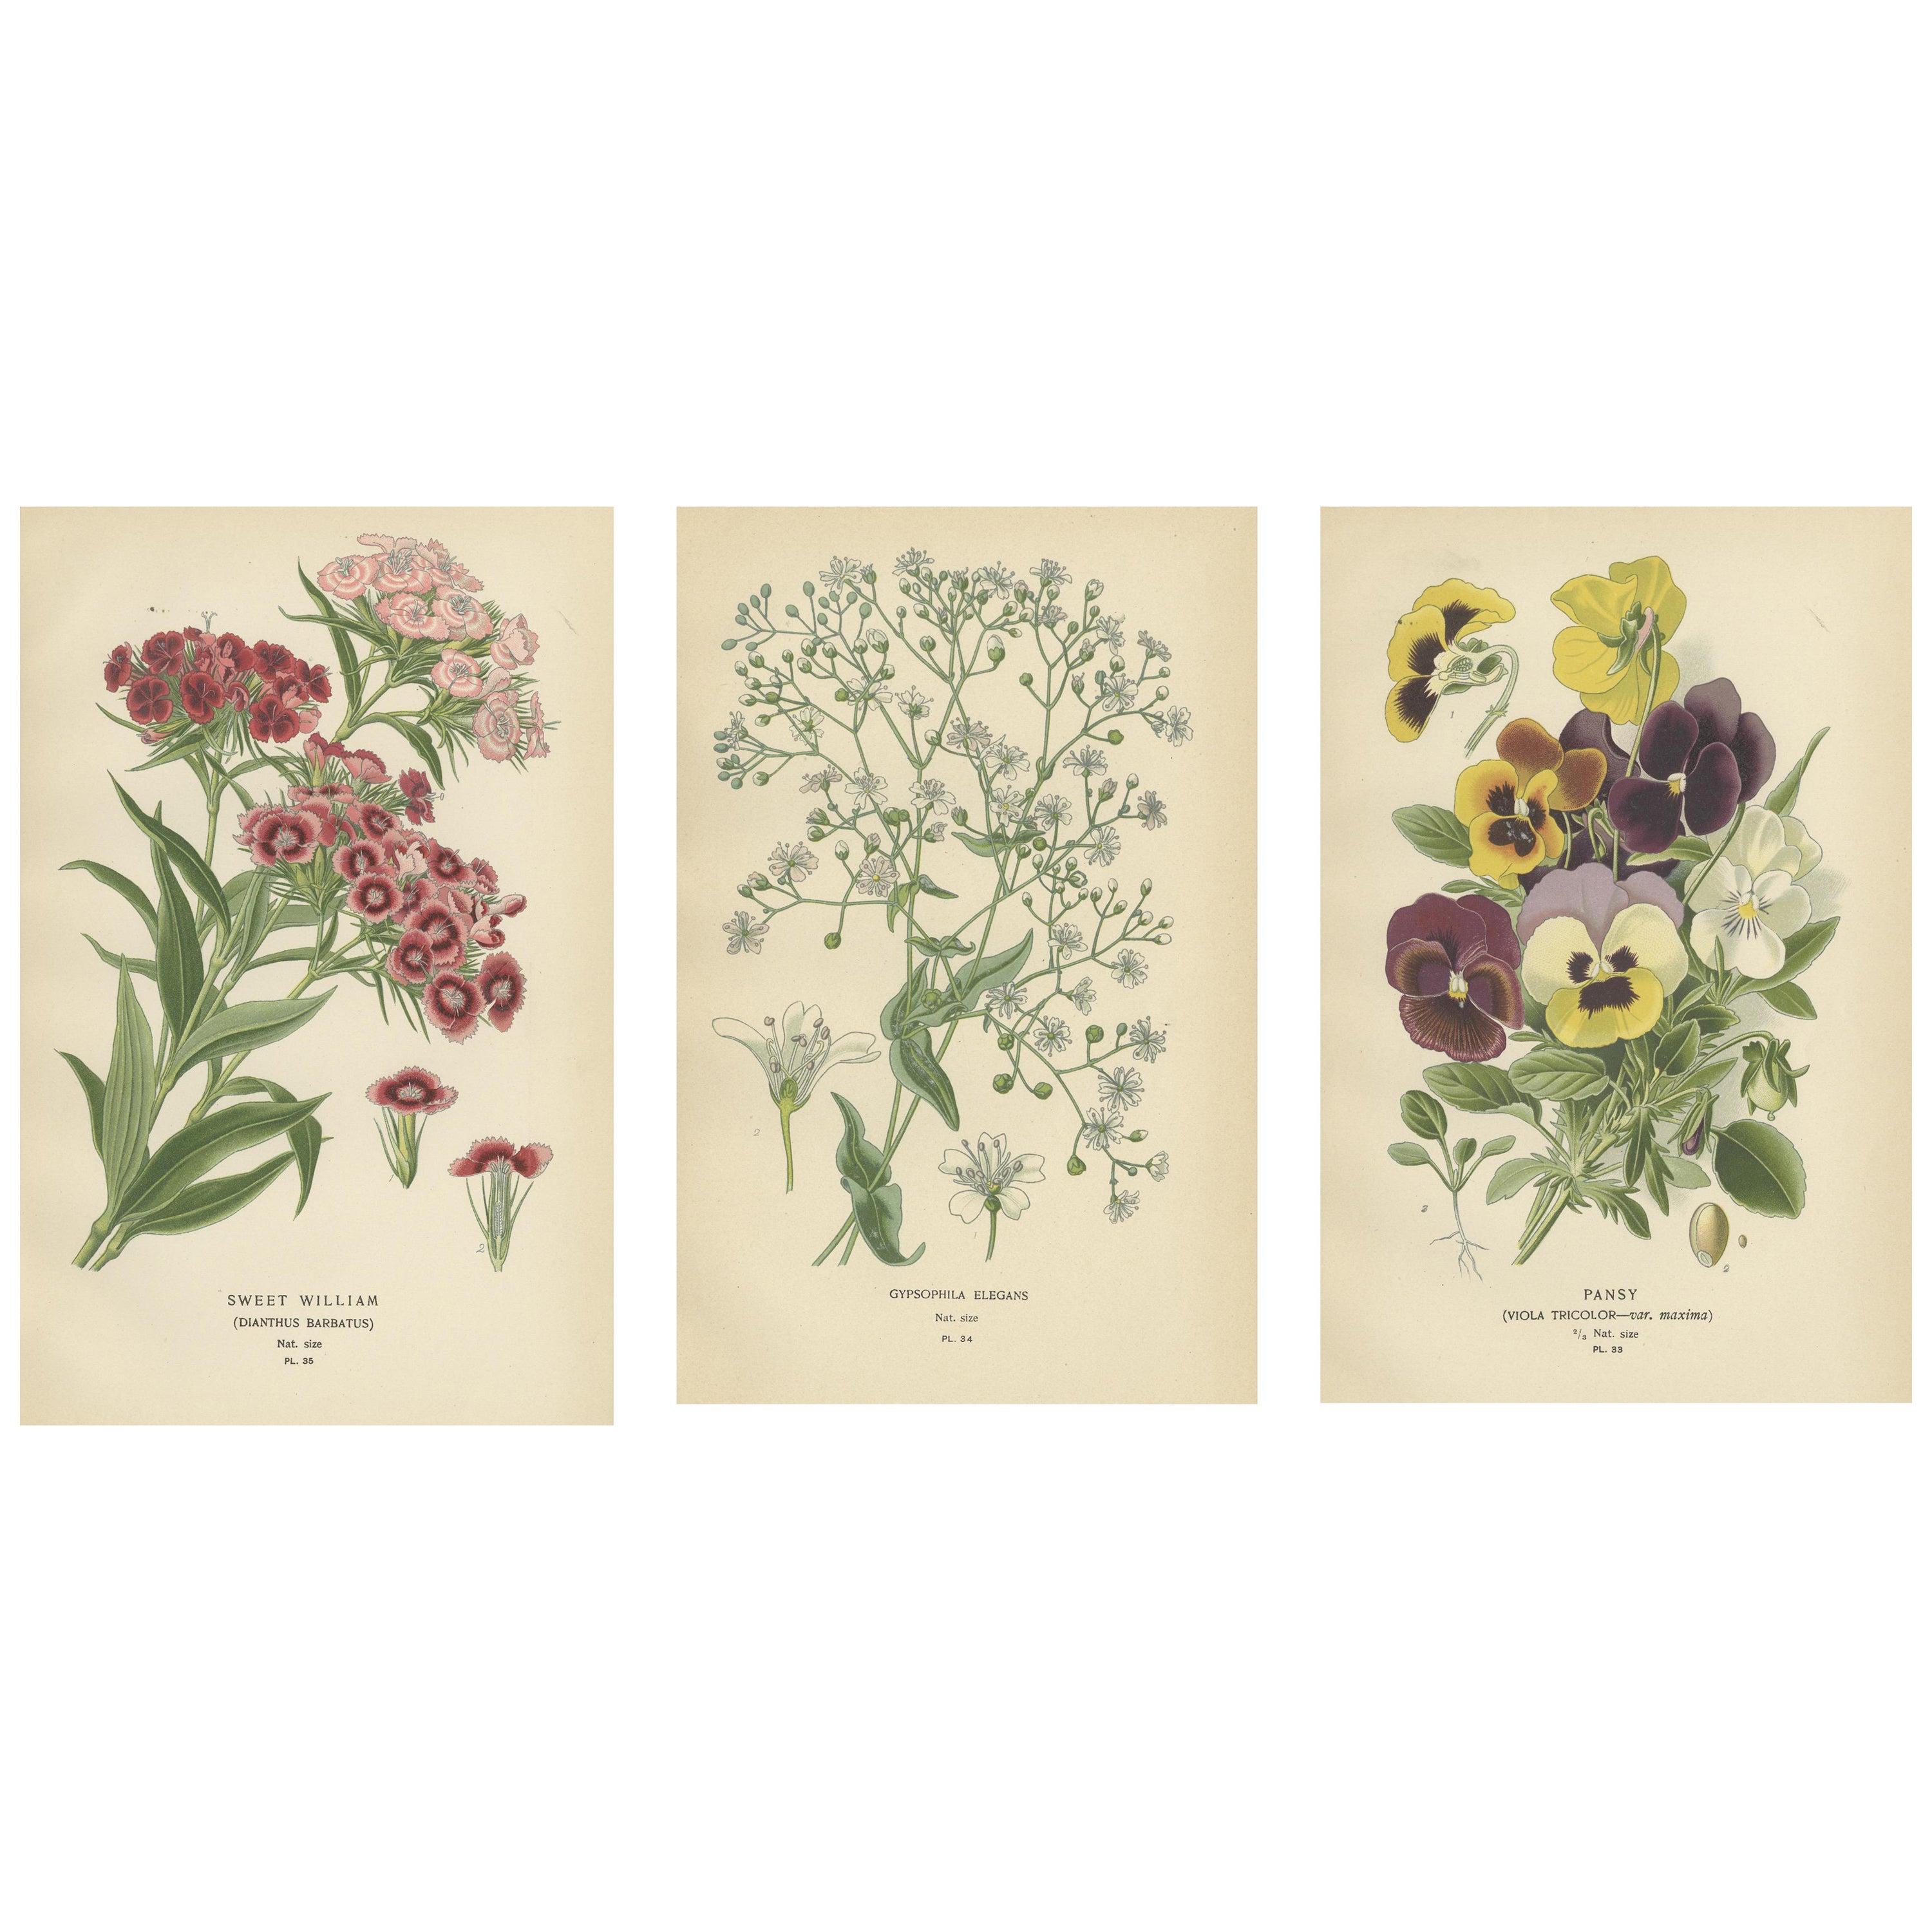 Victorian Vivids: A Floral Collection from Edward Step's Masterworks, 1896 